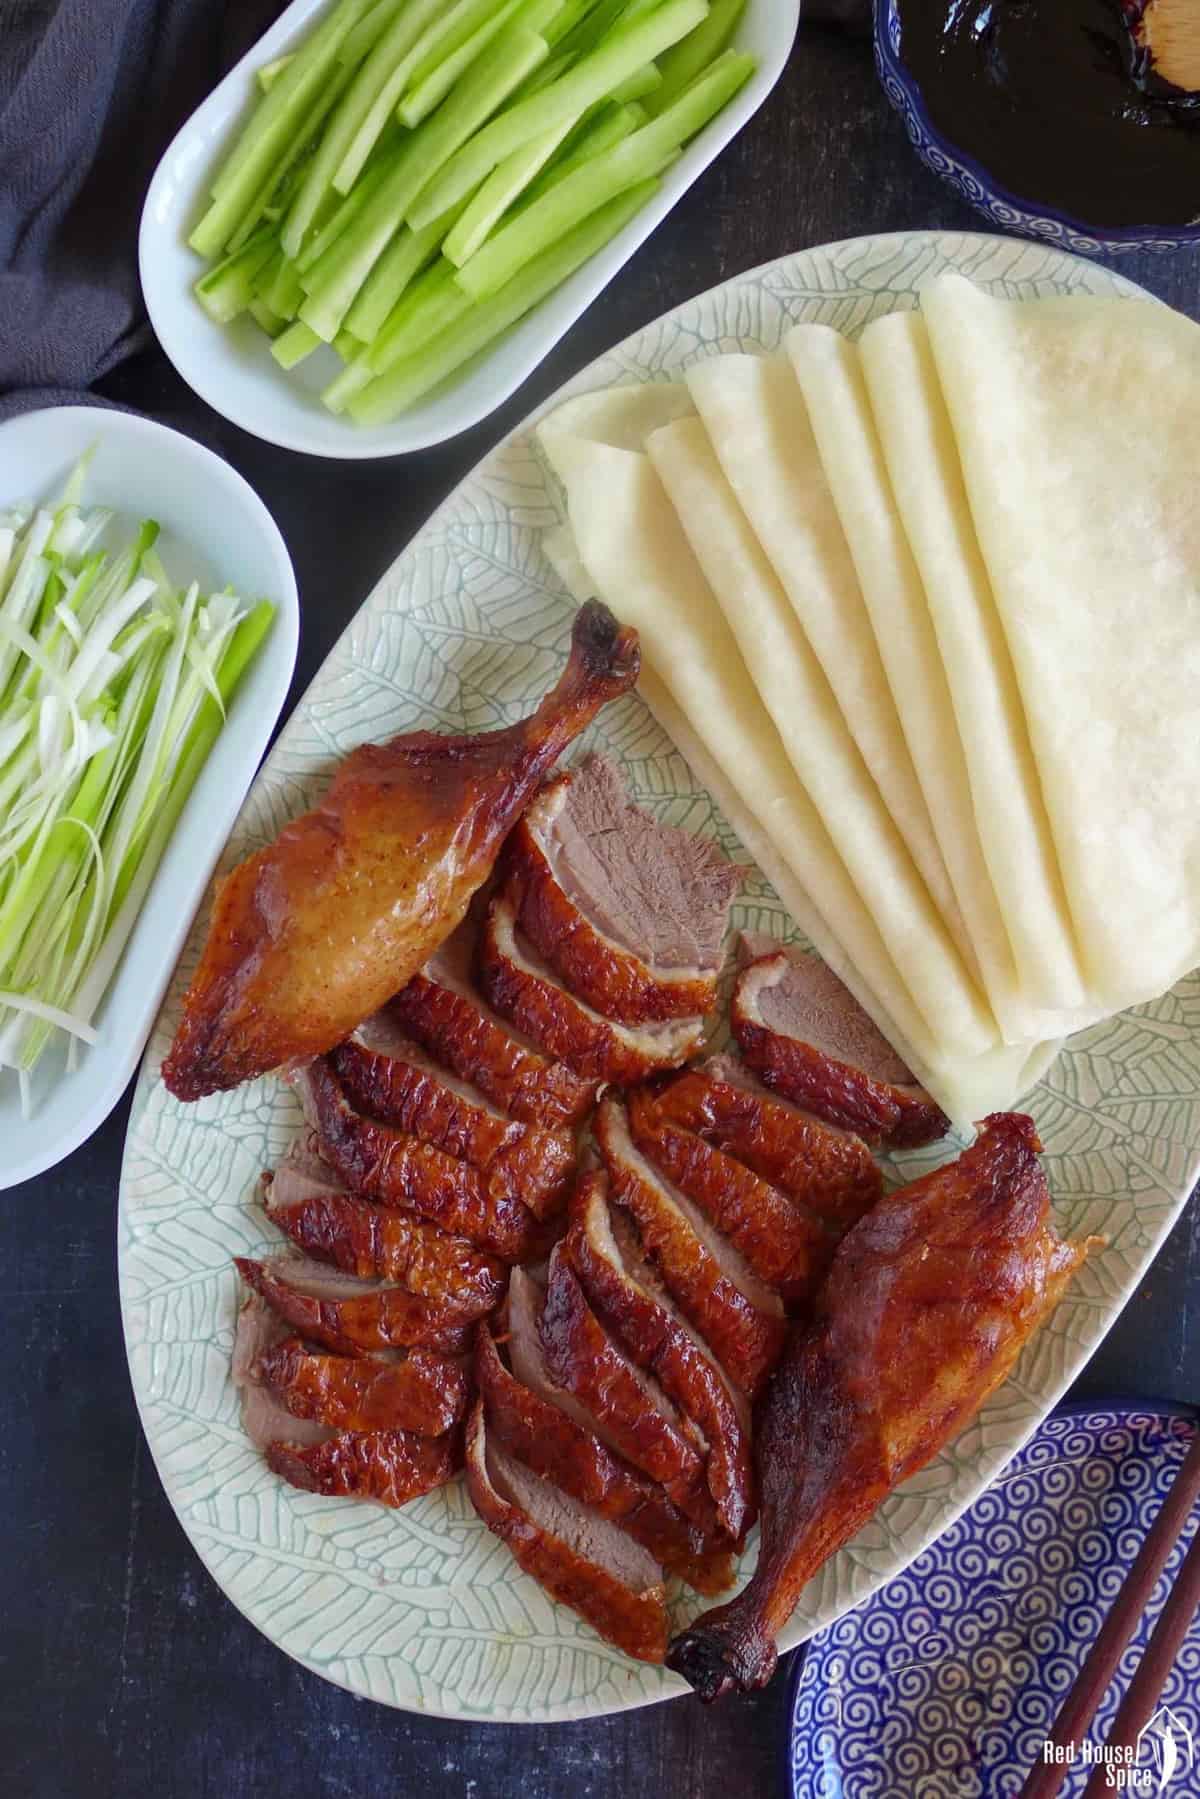 sliced Peking duck with thin pancakes, dark sauce, julienned cucumber and scallions.